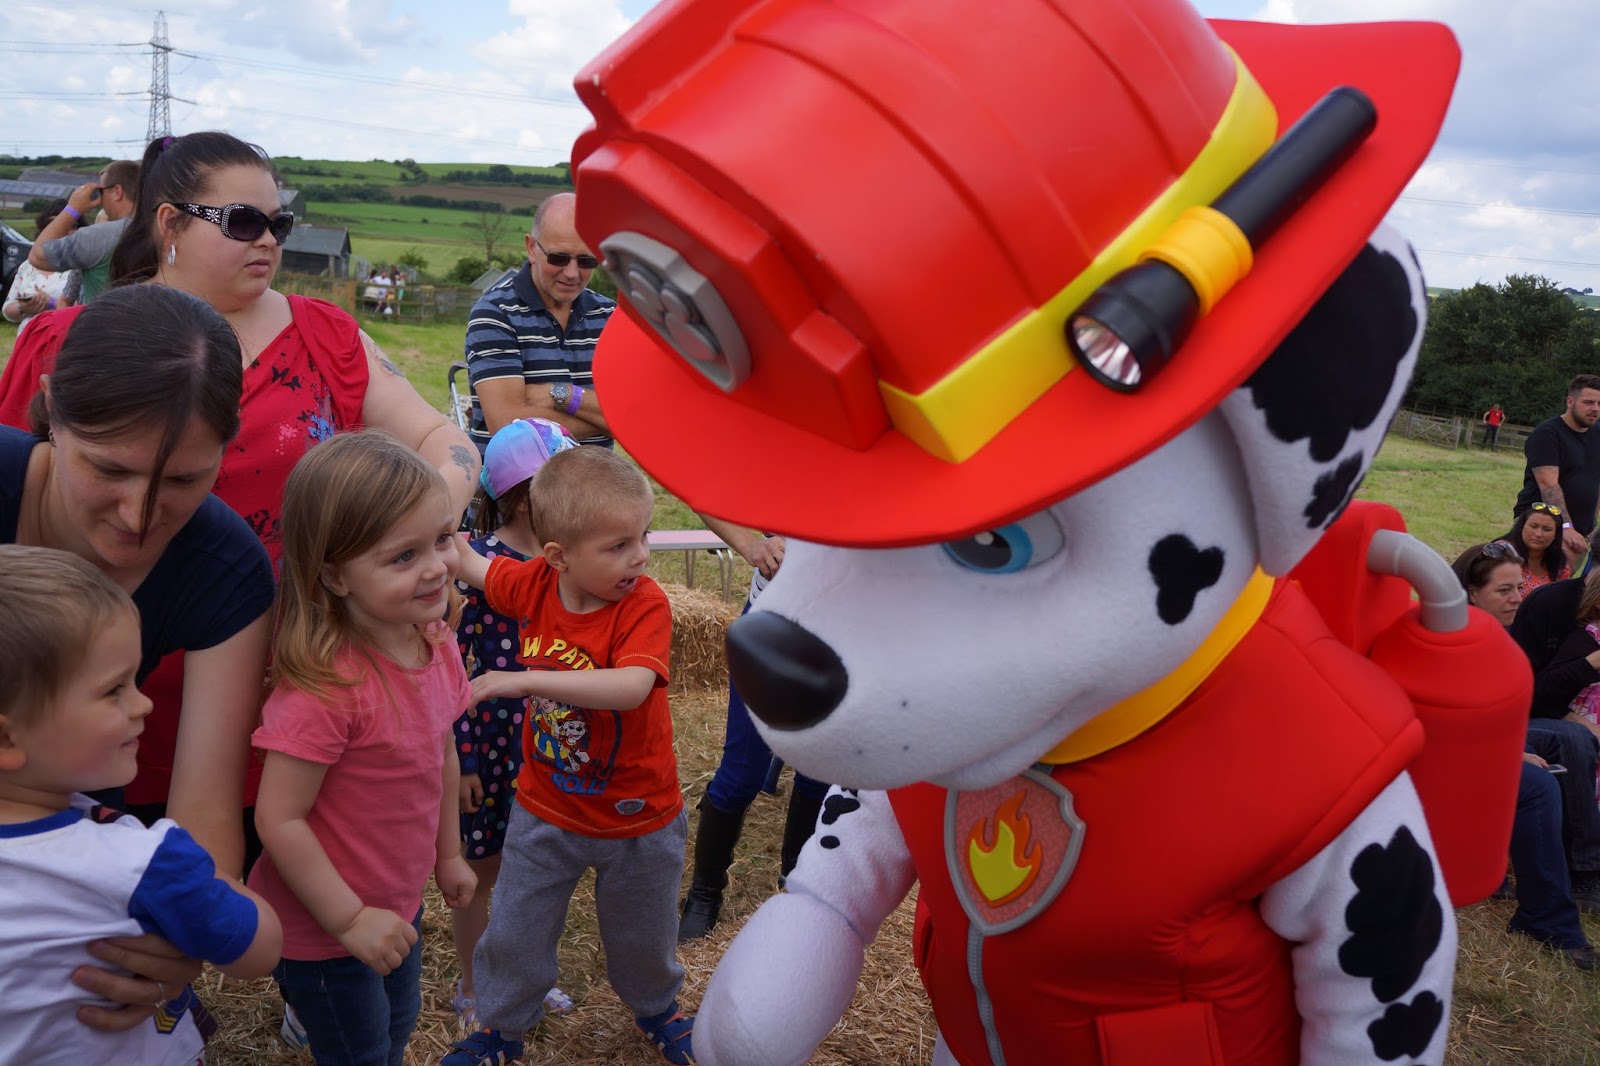 meeting marshall from paw patrol at an event